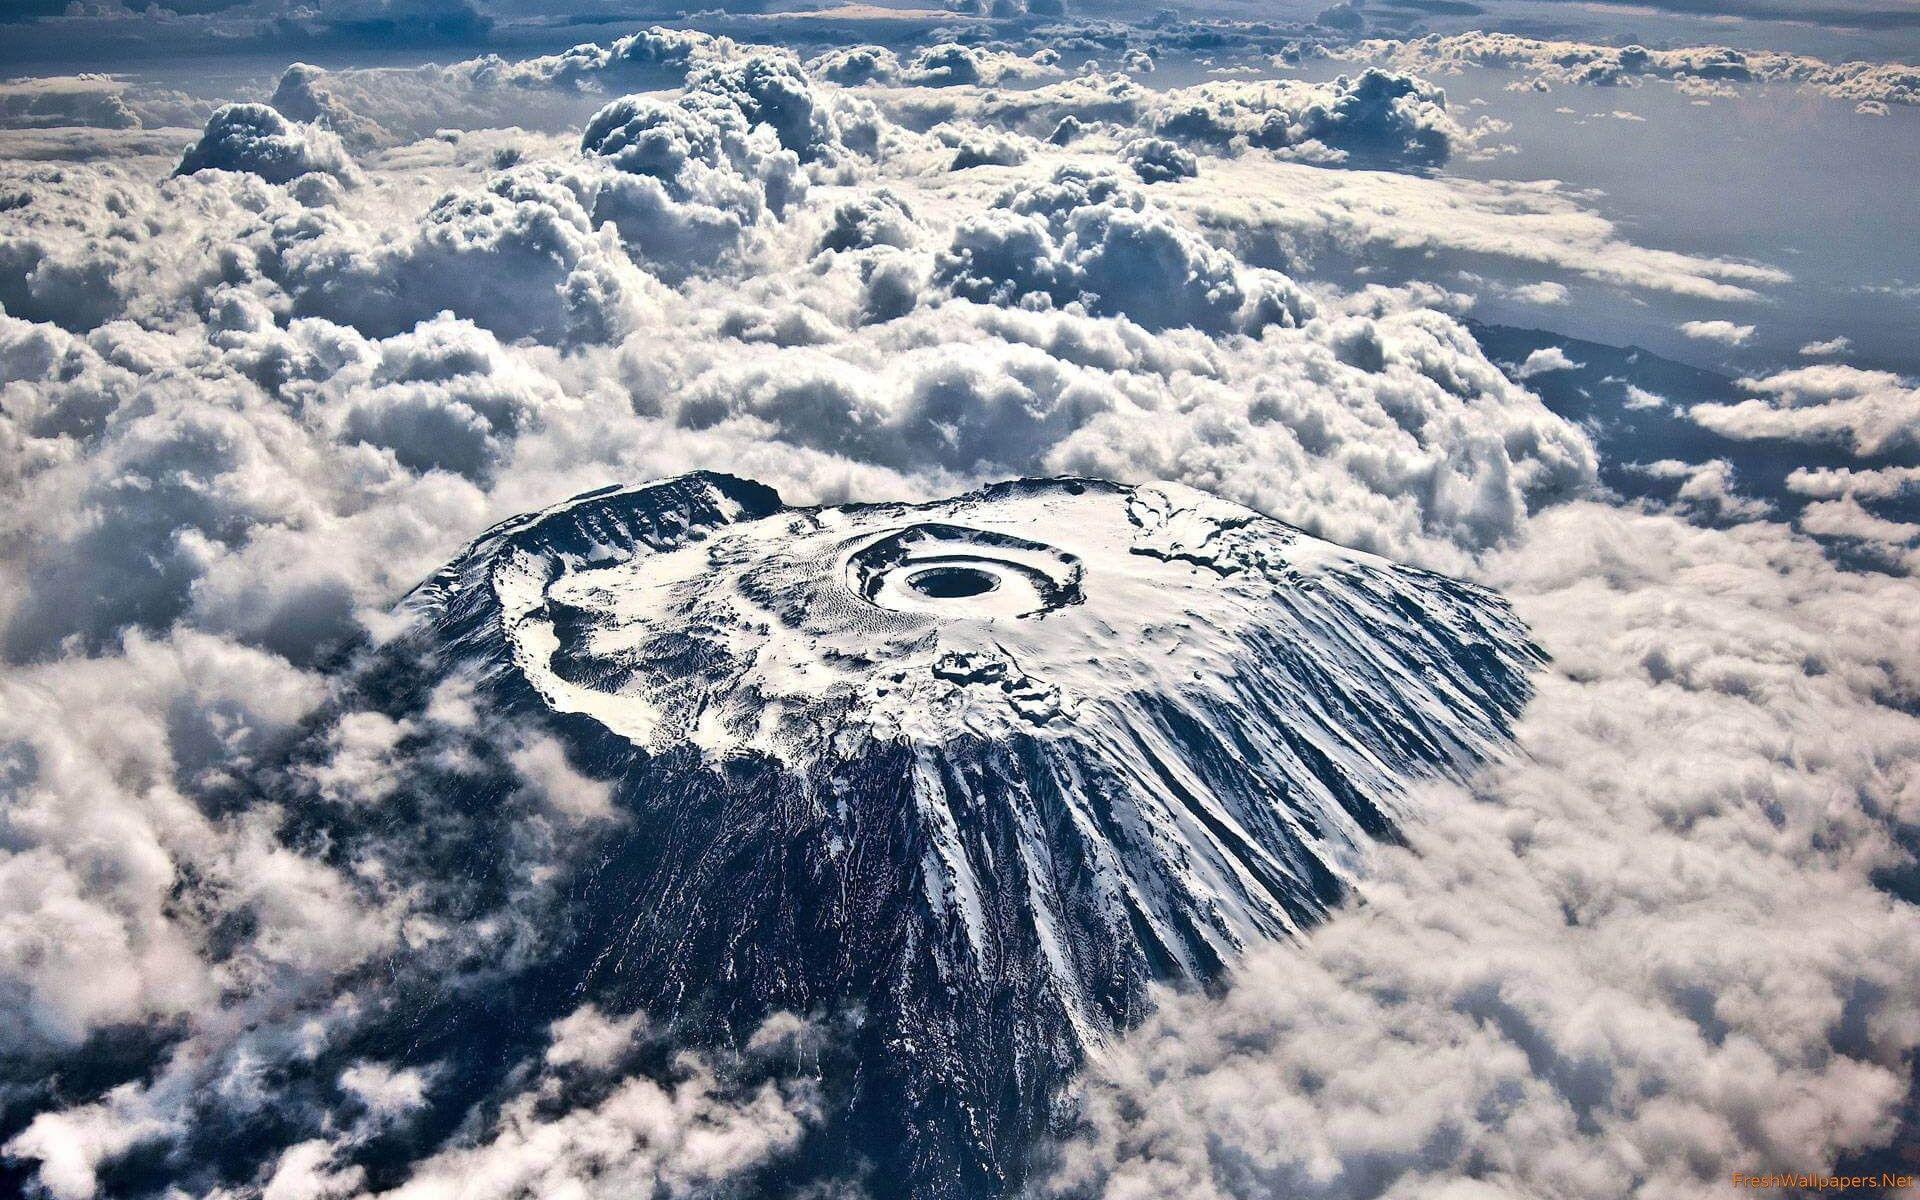 Mount Kilimanjaro Crater Over Clouds From The Air wallpapers